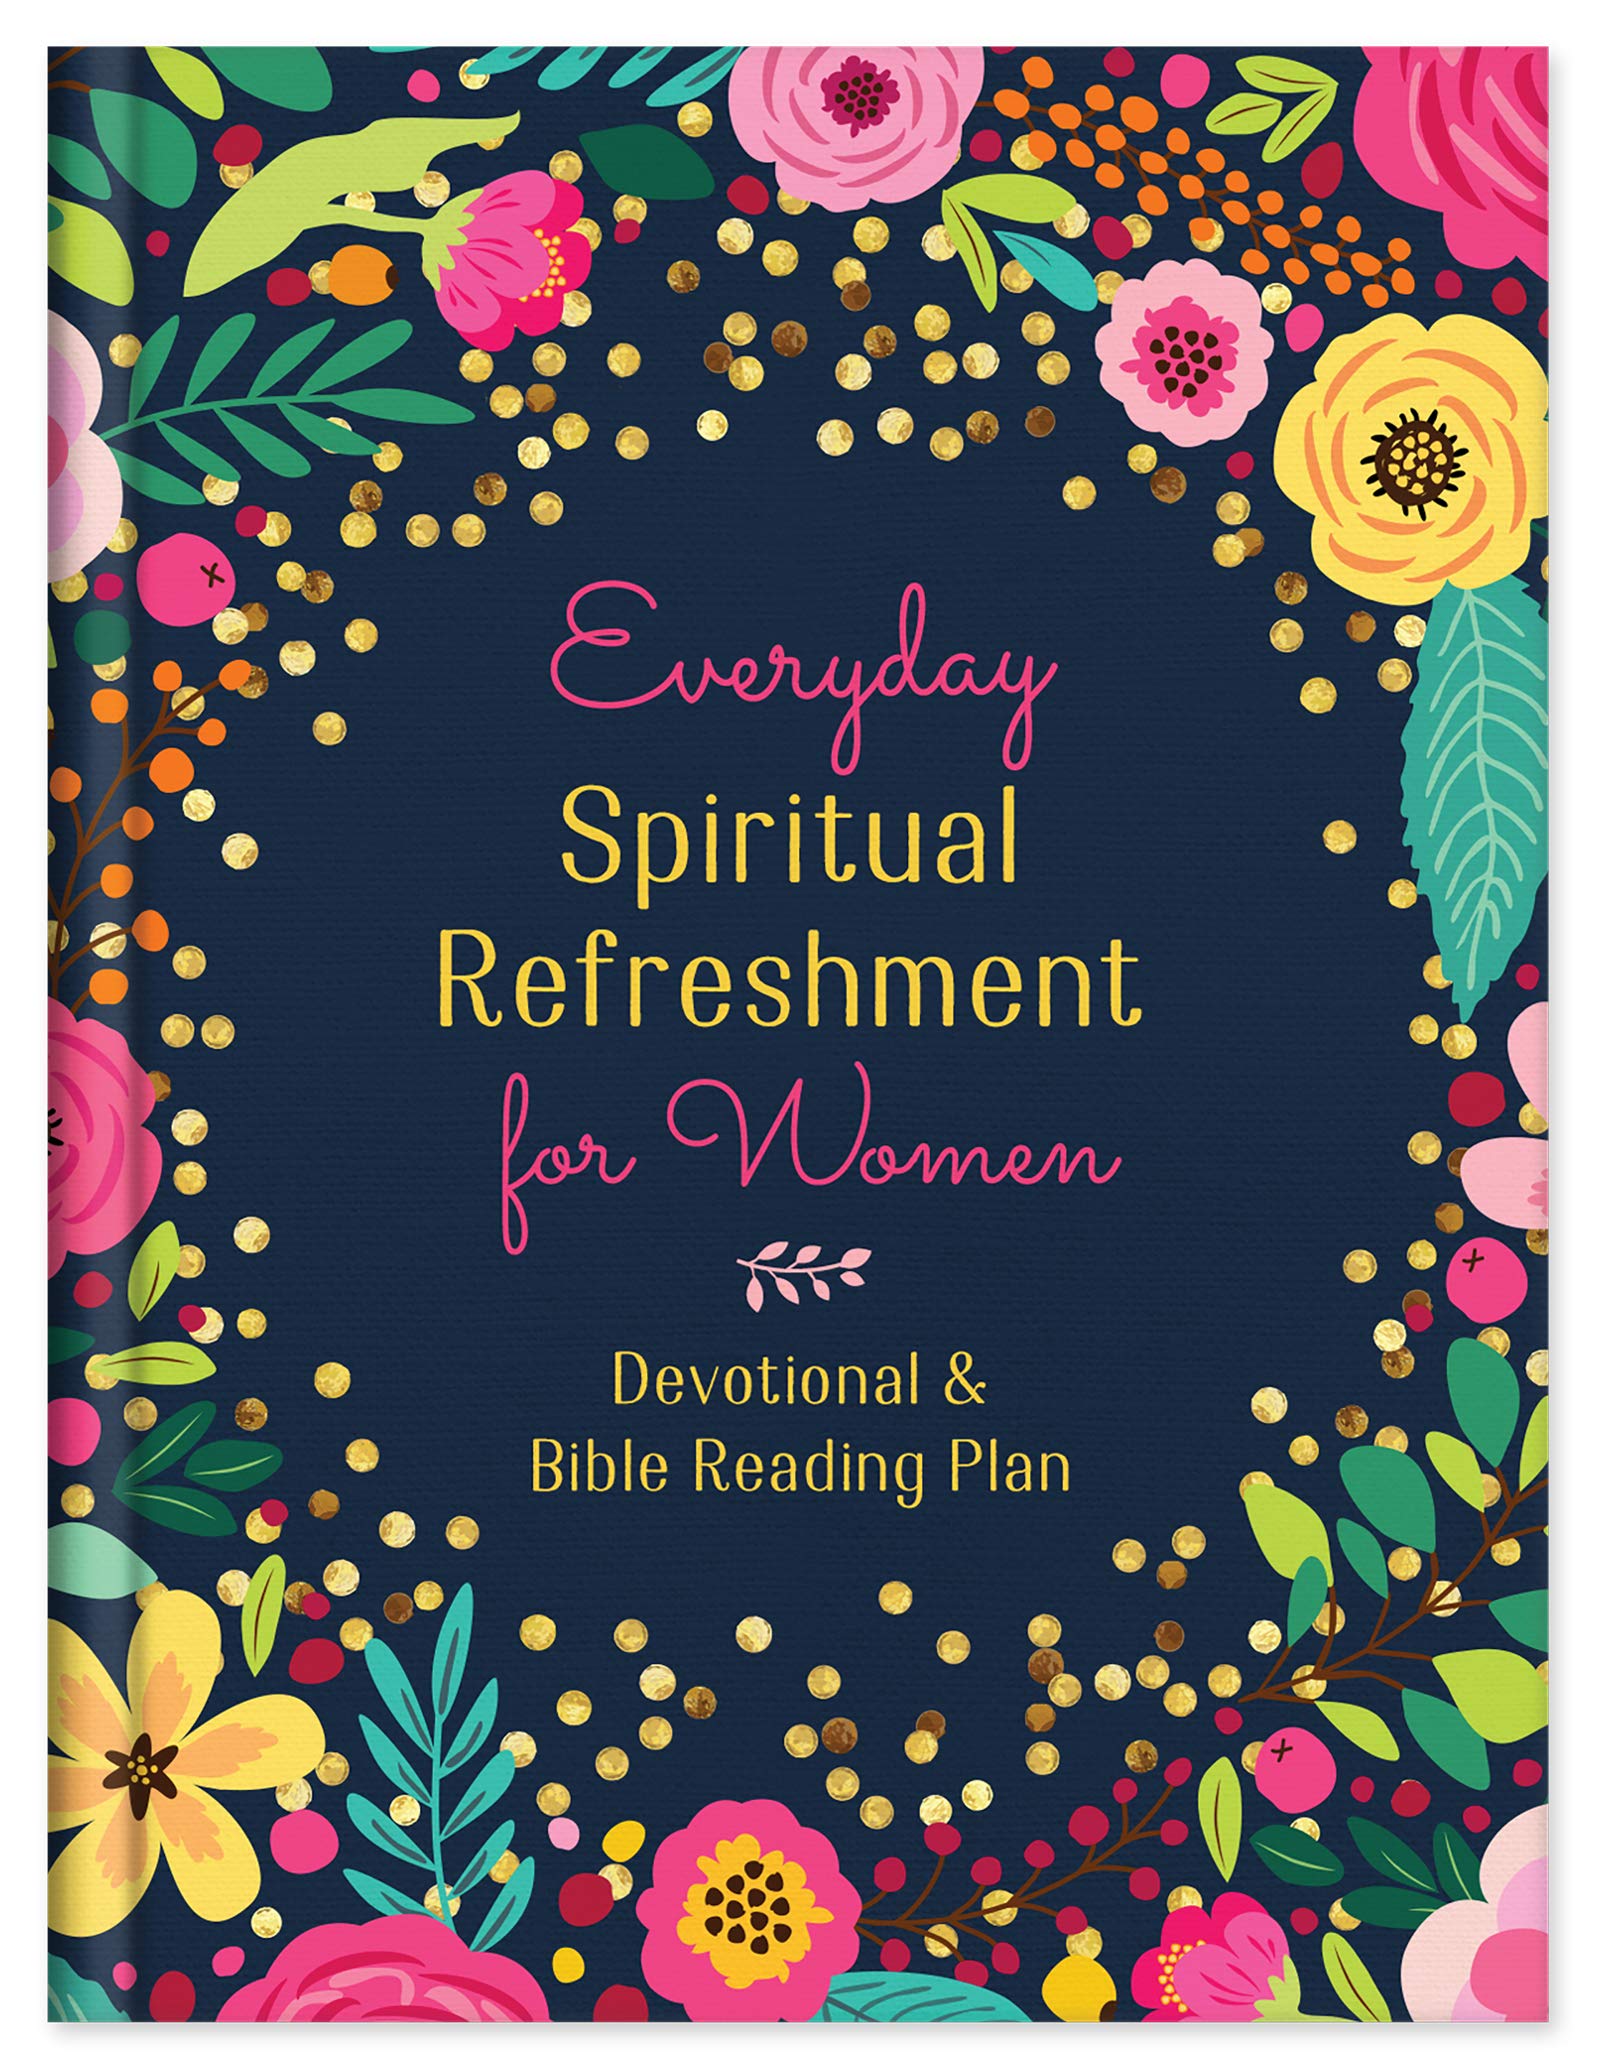 ROCKONLINE | New Creation Church | NCC | Joseph Prince | ROCK Bookshop | ROCK Bookstore | Star Vista | Everyday Spiritual Refreshment for Women | Bible Study | Bible Reading Plan | Devotional | Free delivery for Singapore Orders above $50.